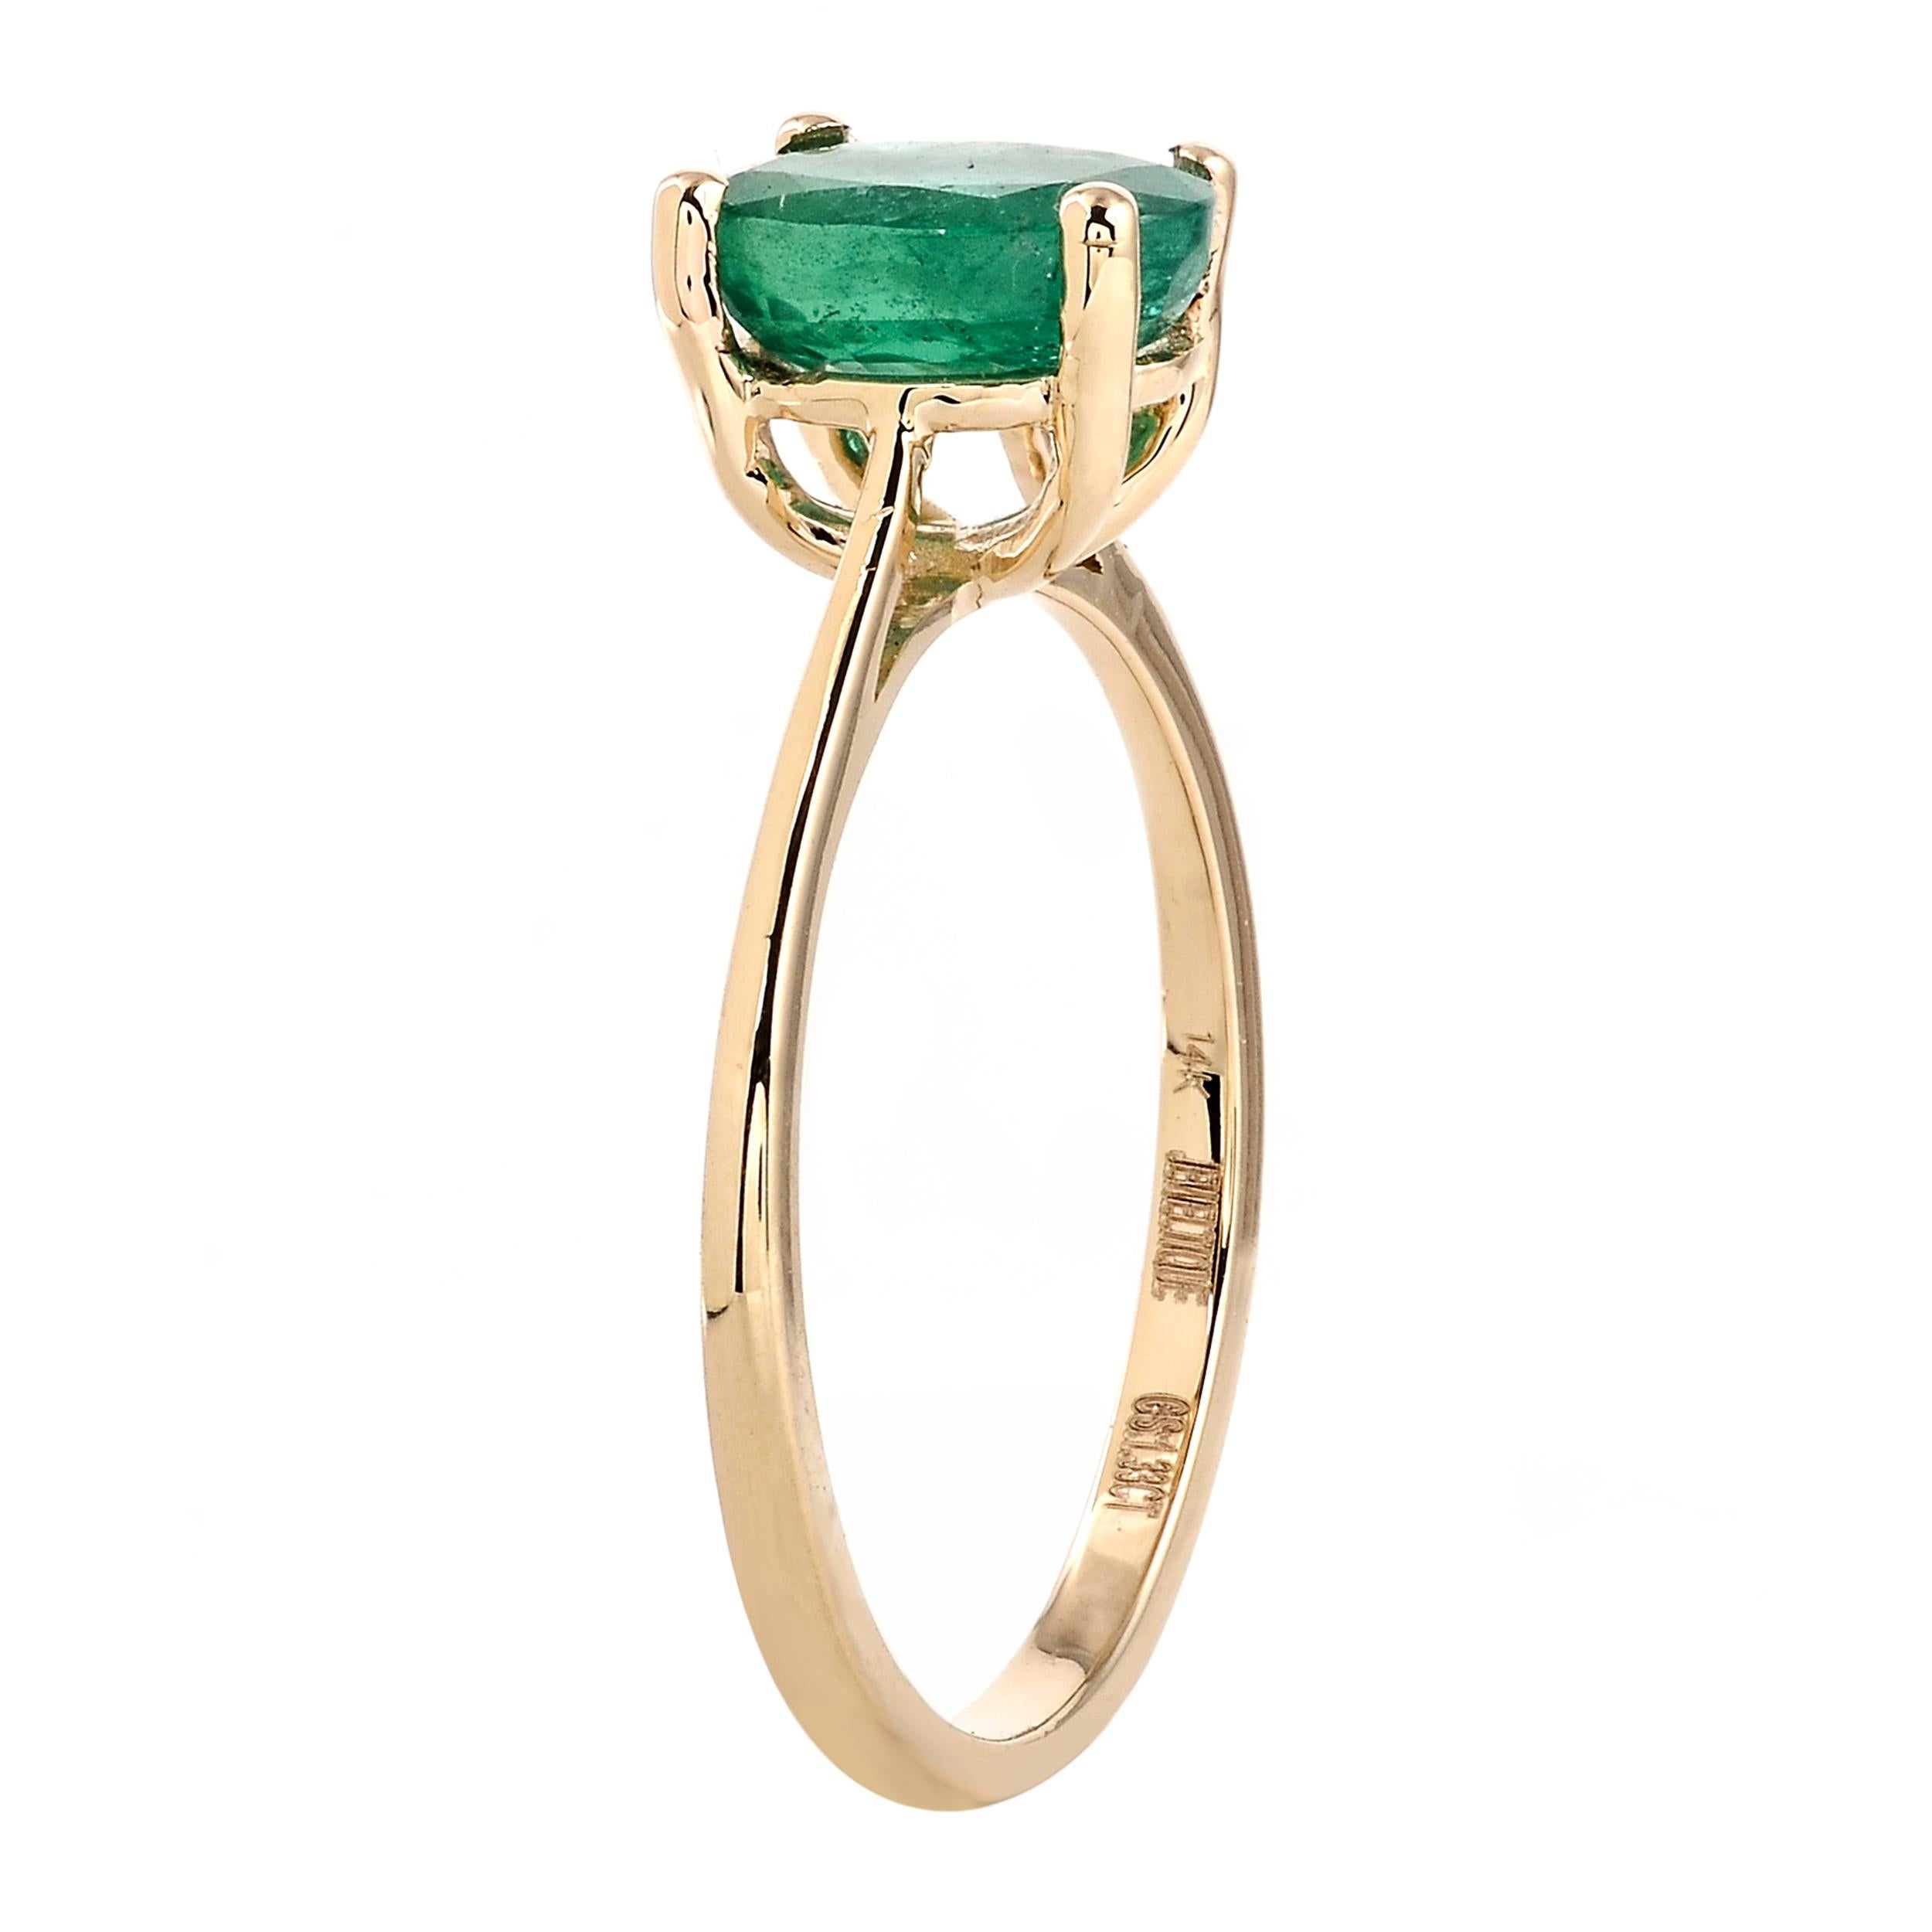 Emerald Cut Elegant 14K 1.33ct Emerald Cocktail Ring, Size 7 - Timeless & Elegant Jewelry For Sale